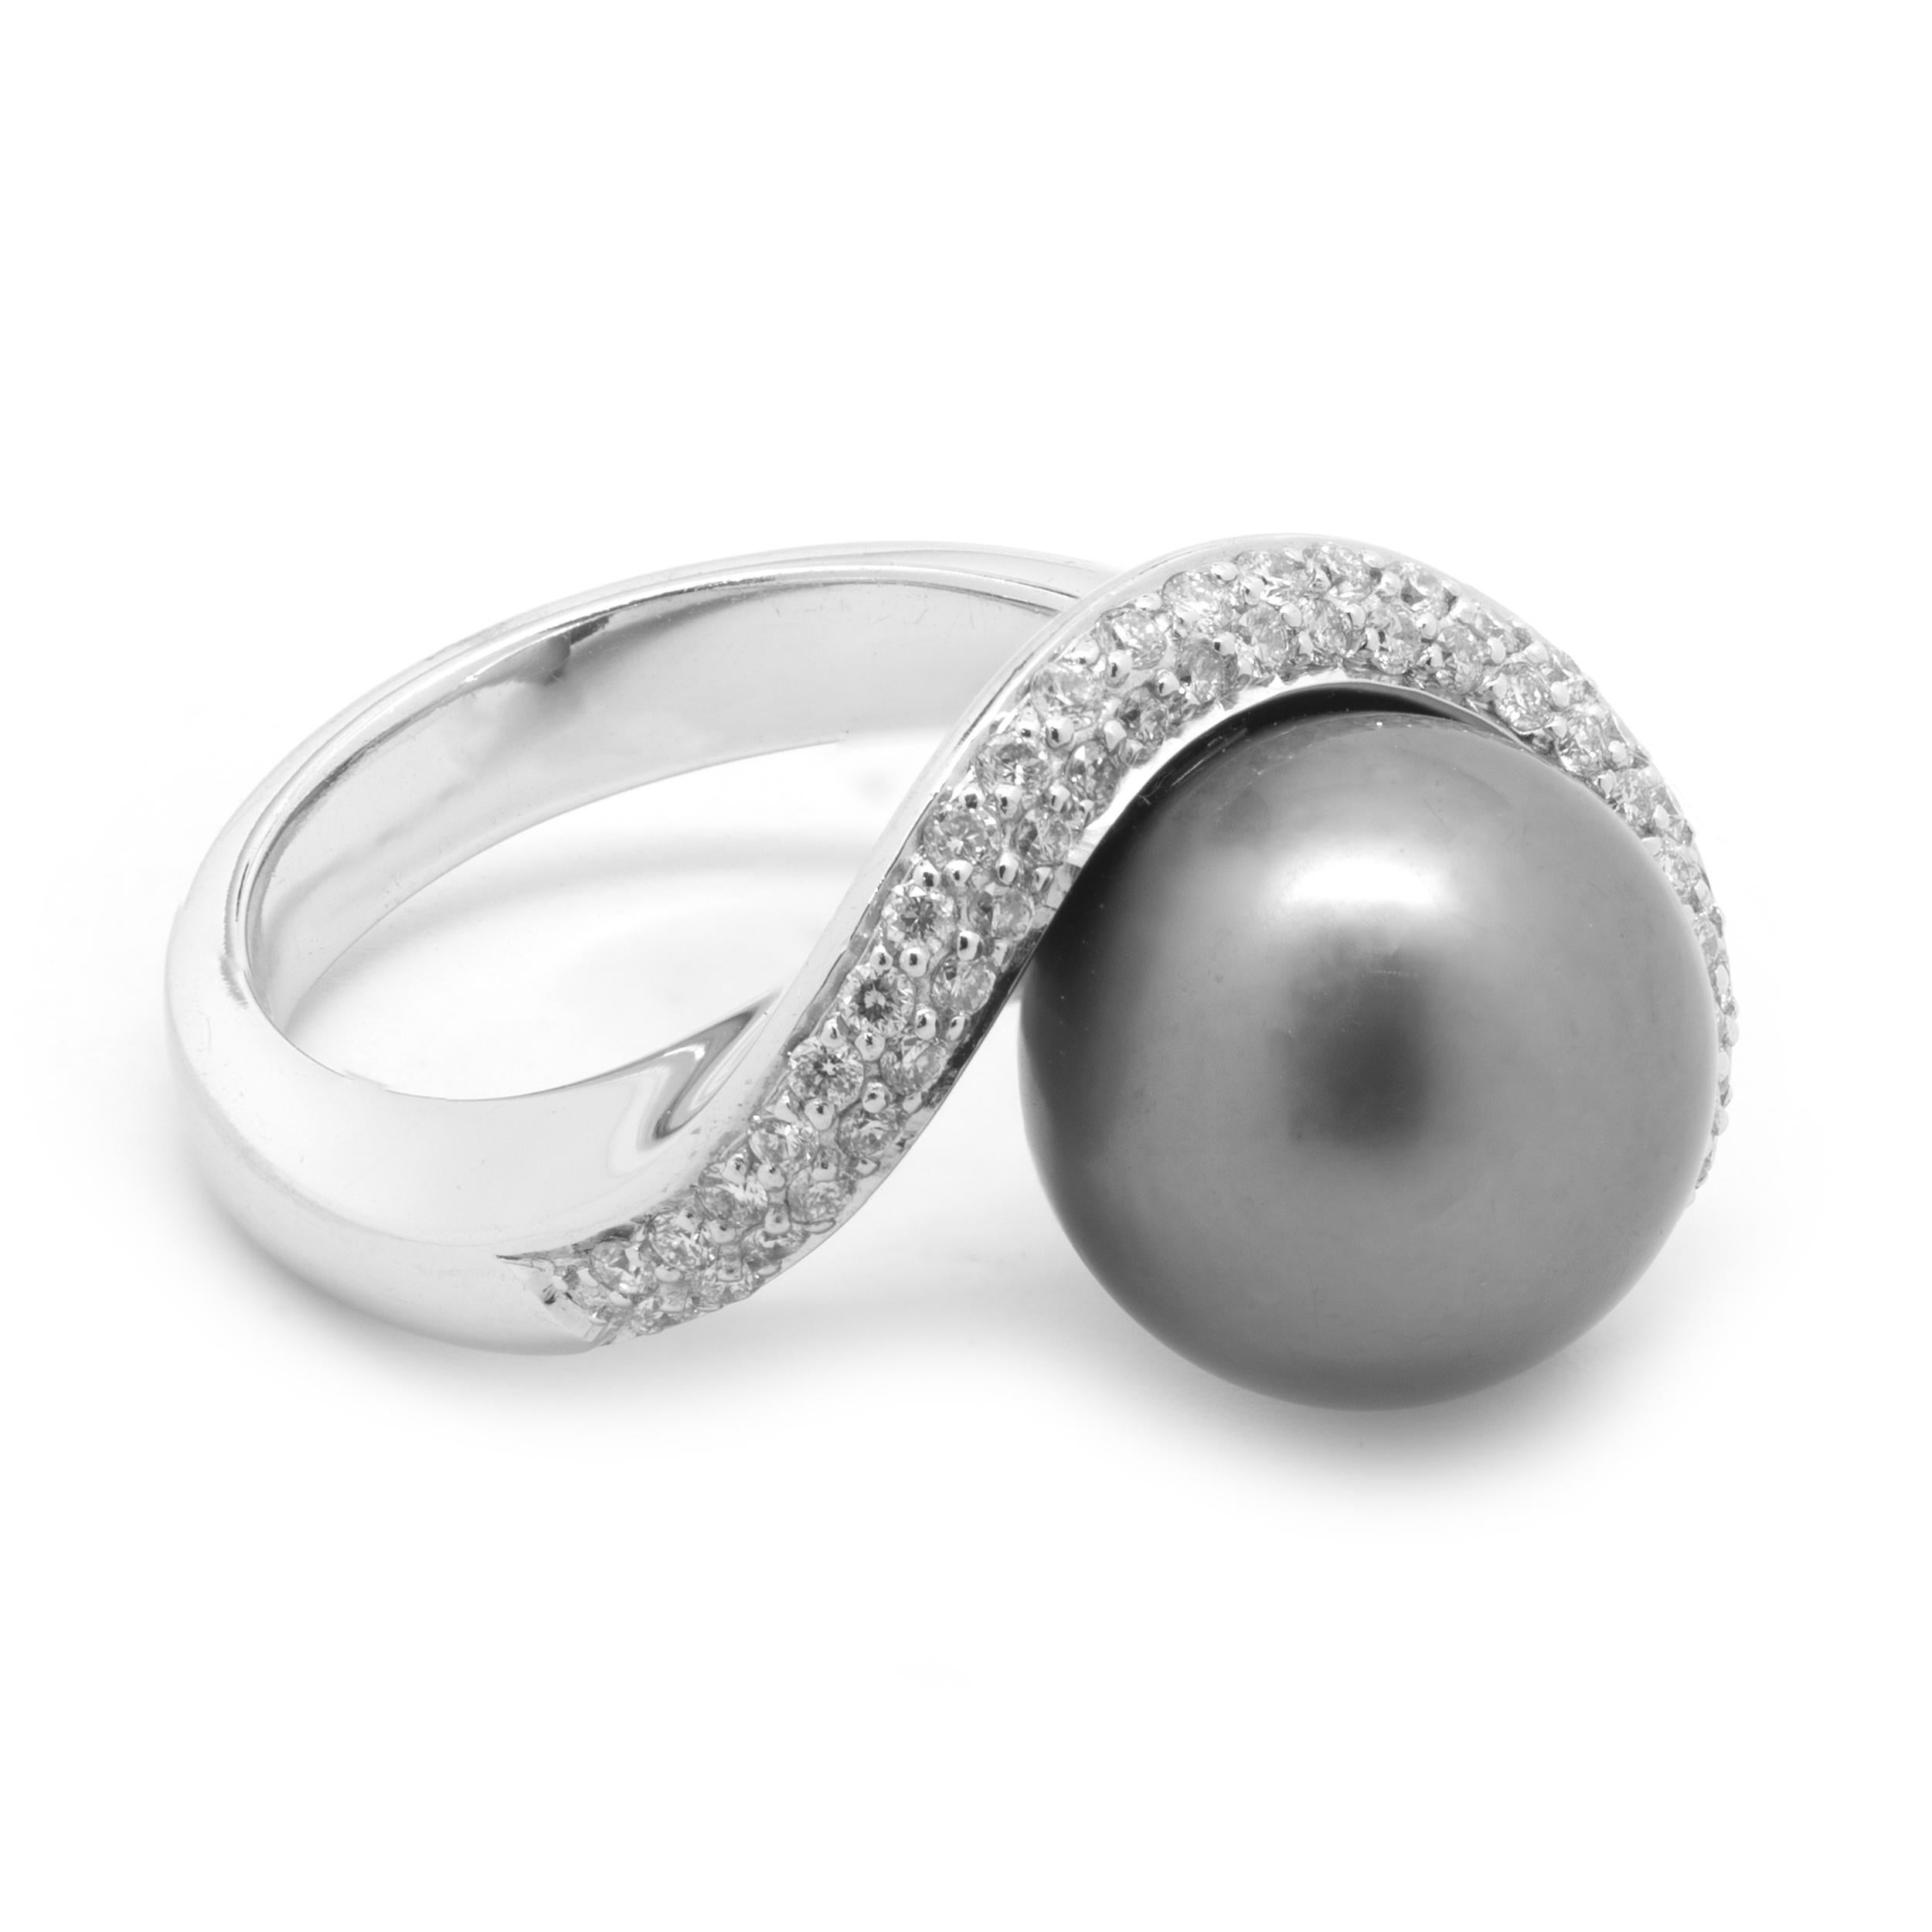 Material: 14K white gold
Pearl: 1 11.25MM Tahitian pearl
Diamonds: 53 round cut = .53cttw
Color: H
Clarity: SI1
Ring Size: 7 (please allow two additional shipping days for sizing requests)
Dimensions: ring measures 15.5mm wide
Weight:  12.03 grams
